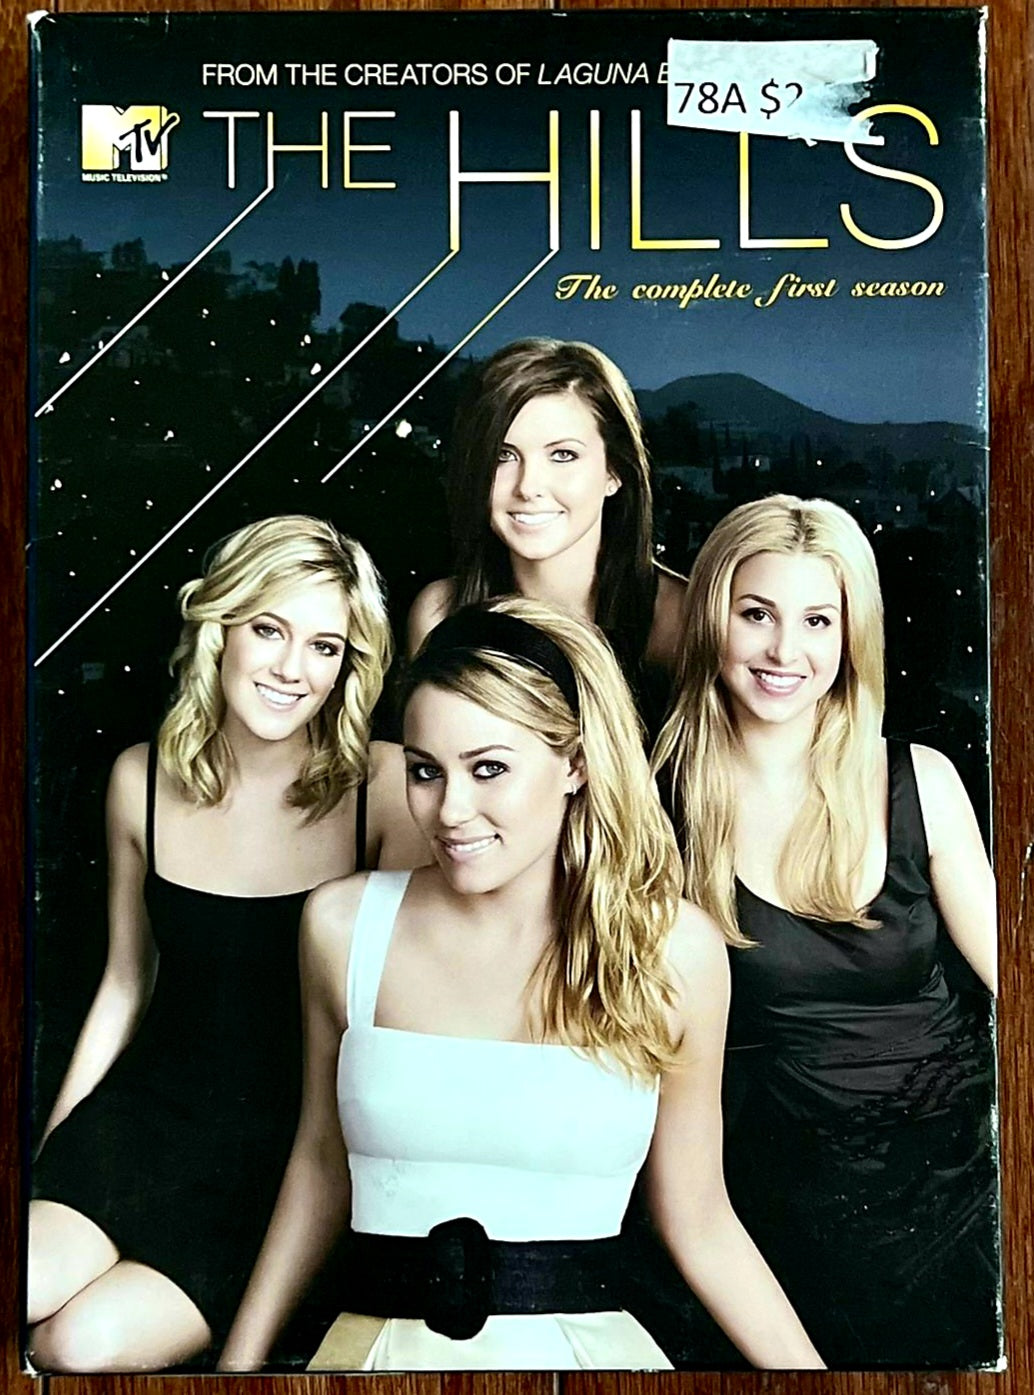 'THE HILLS' *The Complete 1st Season on DVD